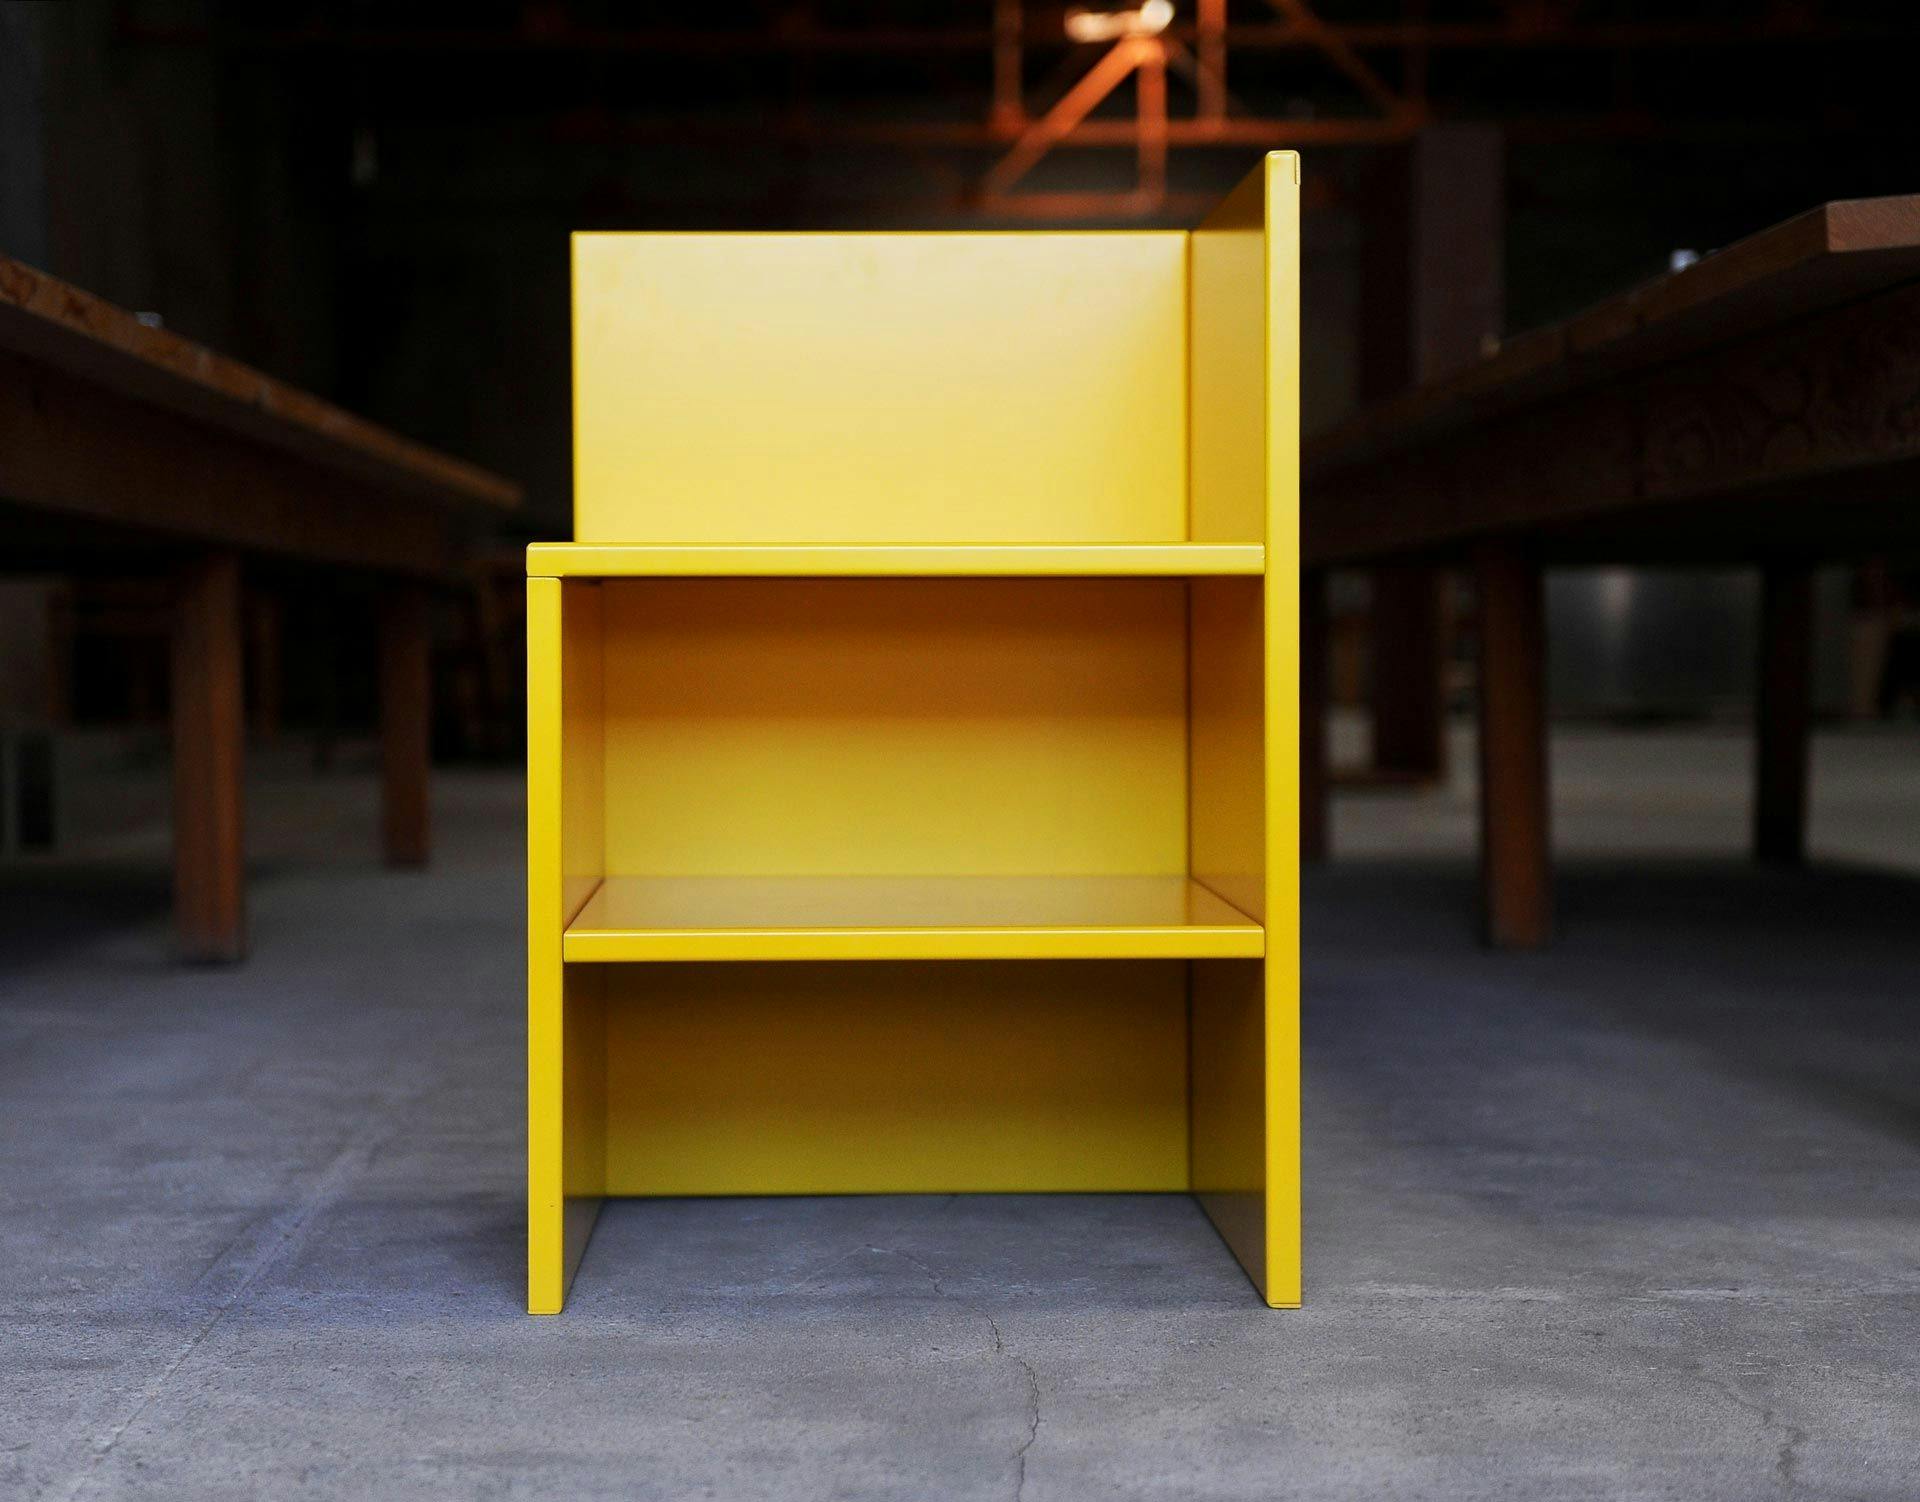 A photograph of a chair by Donald Judd.